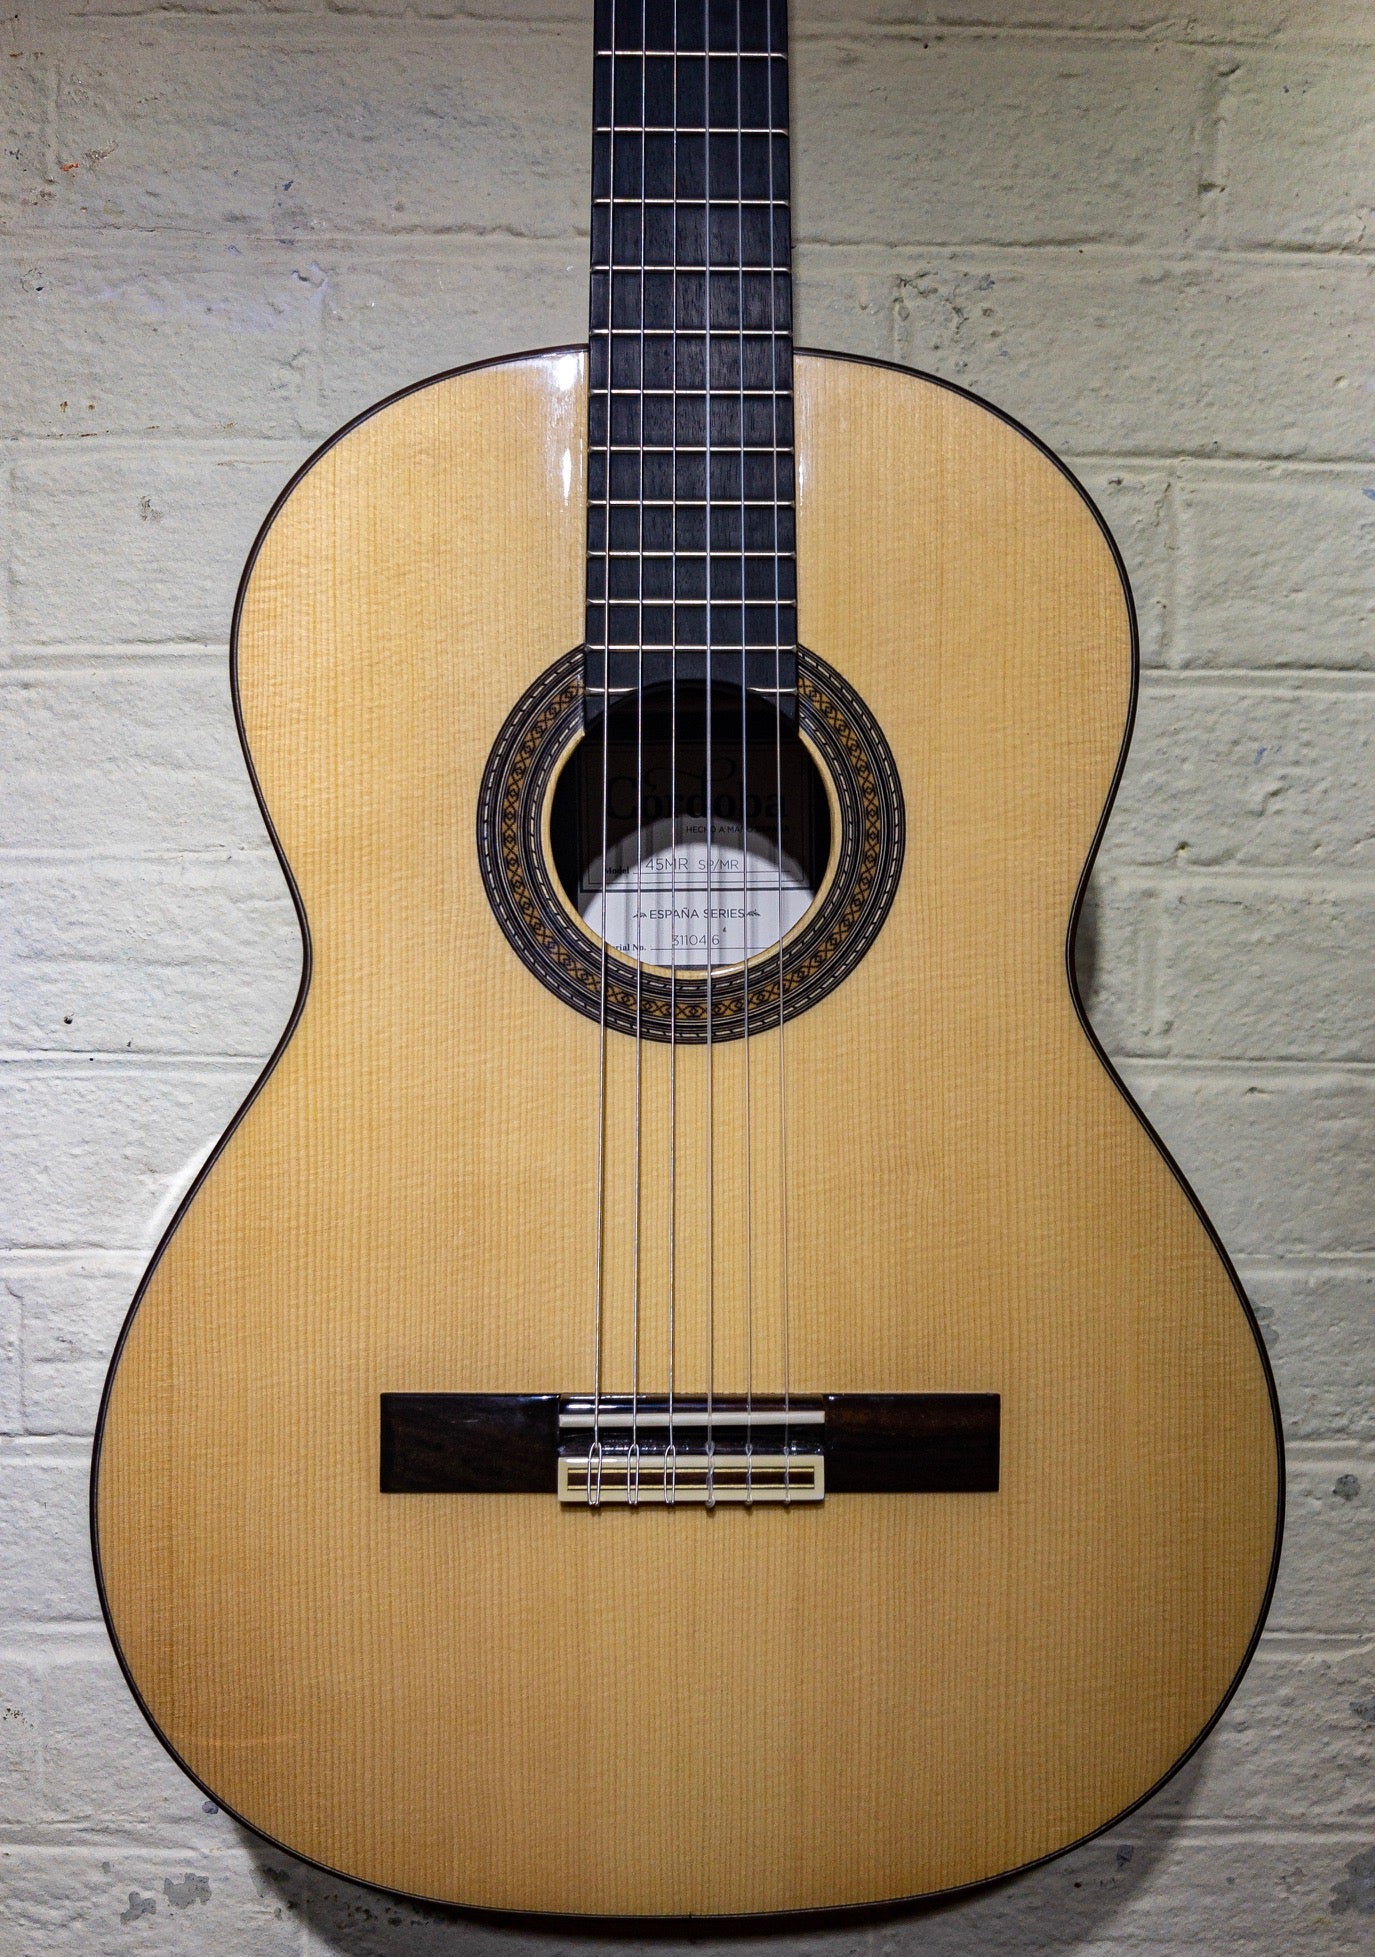 CORDOBA 45MR SPRUCE TOP - ESPANA SERIES CLASSICAL WITH DELUXE CASE